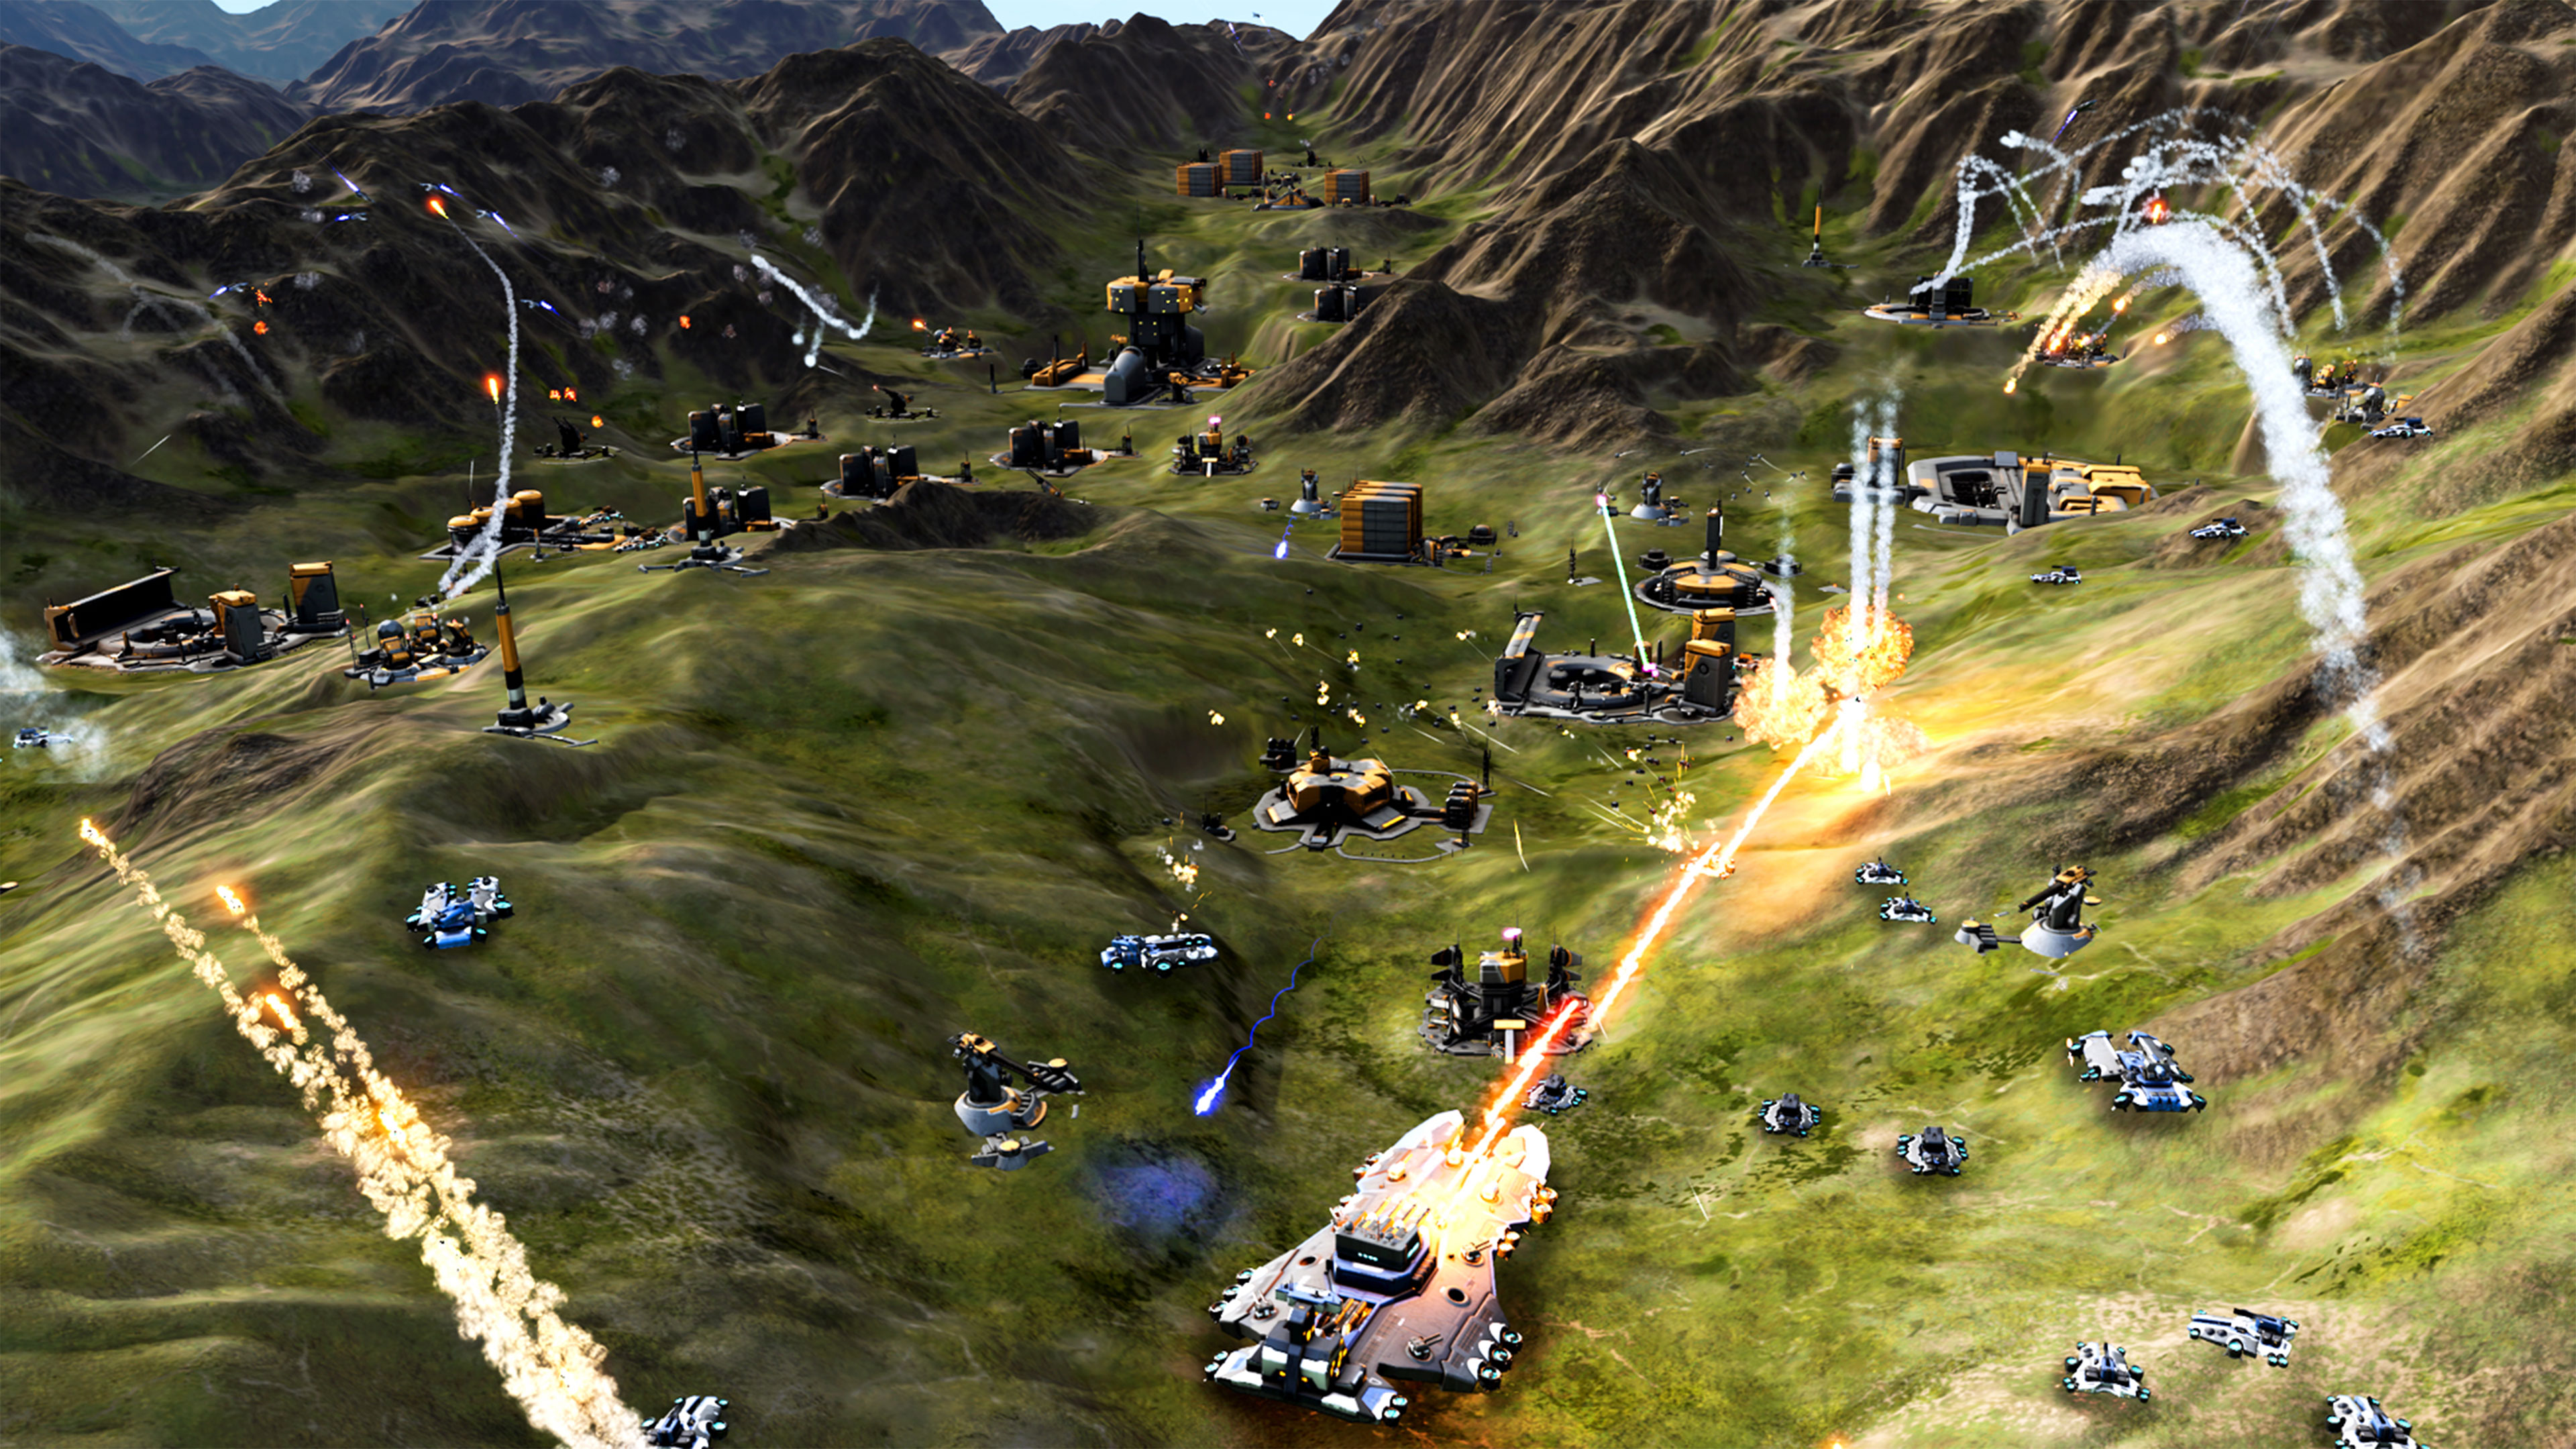 Ashes of the Singularity Wallpapers in Ultra HD | 4K ... - 3840 x 2160 jpeg 1425kB